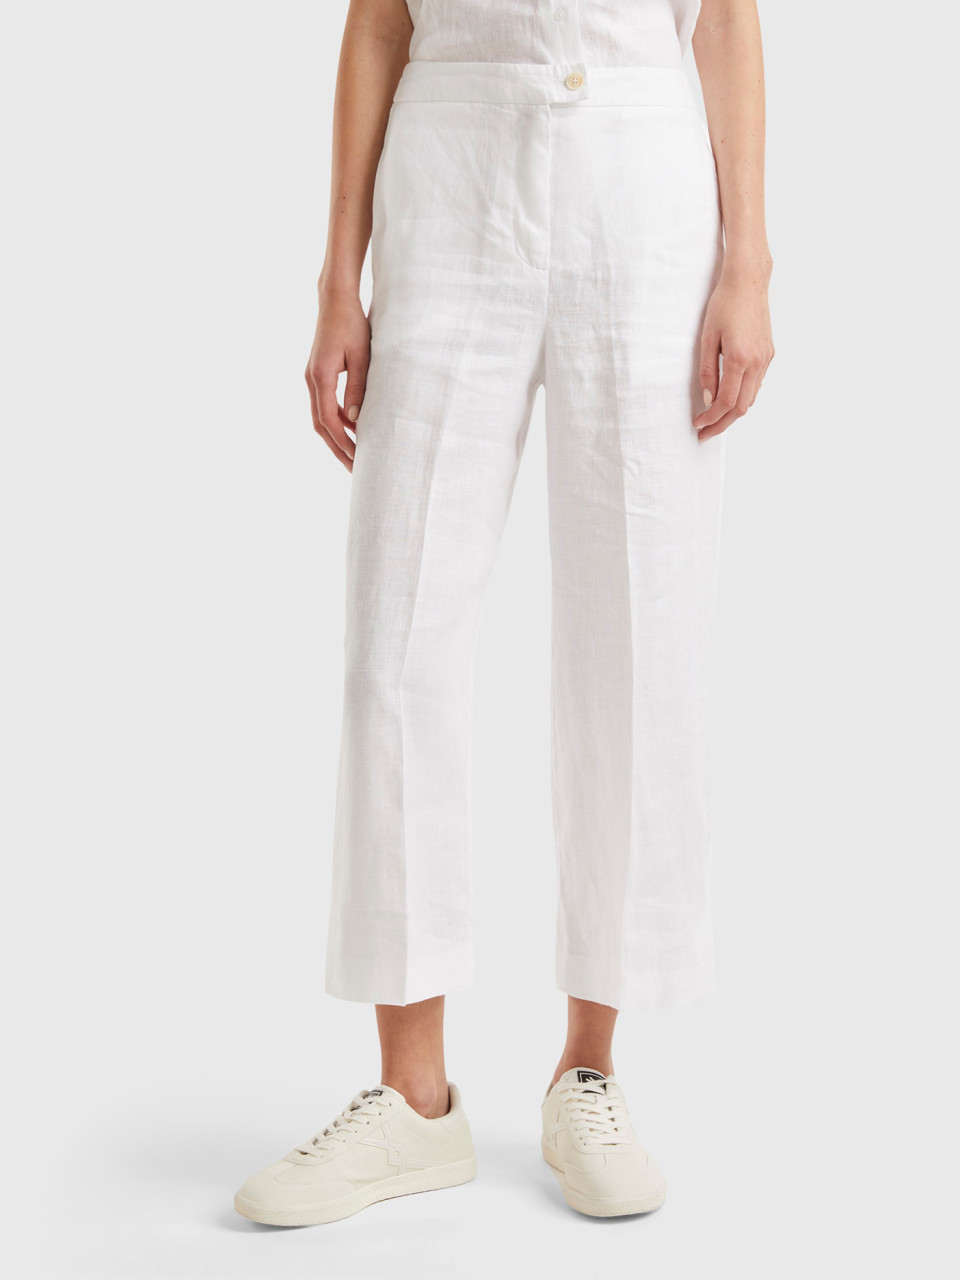 Benetton, Cropped Trousers In Pure Linen, White, Women